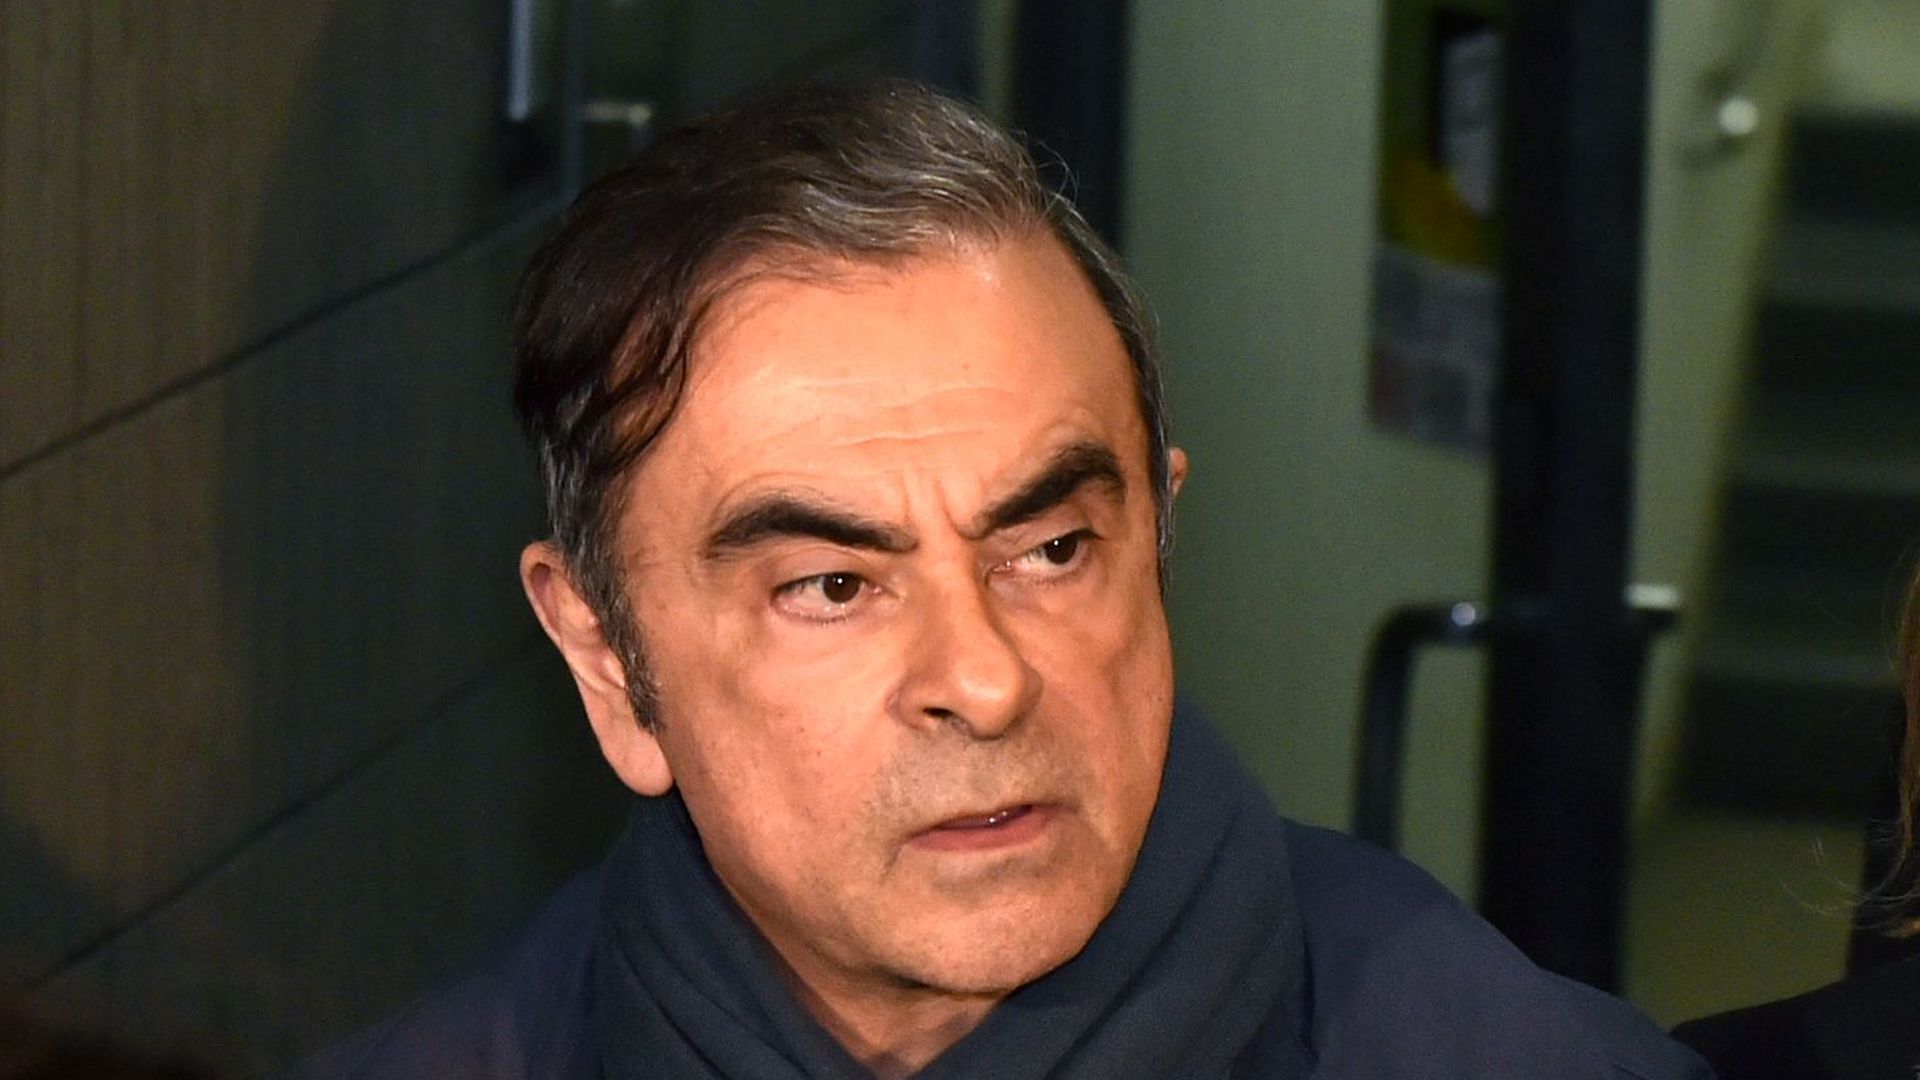 Former Nissan Chairman Carlos Ghosn has been granted bail for a second time.